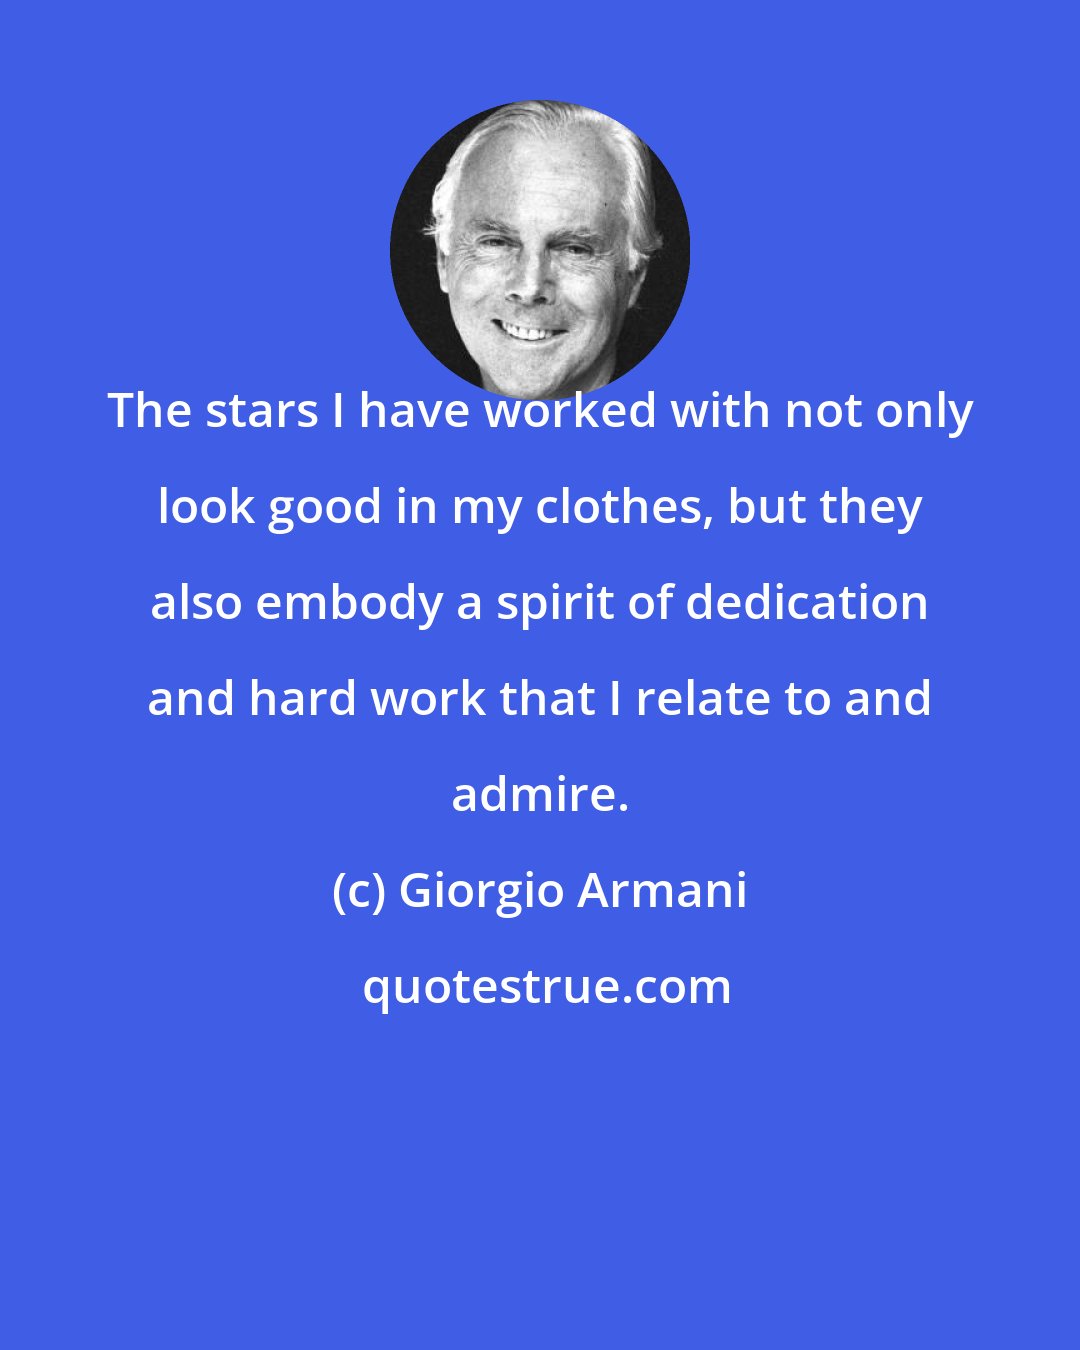 Giorgio Armani: The stars I have worked with not only look good in my clothes, but they also embody a spirit of dedication and hard work that I relate to and admire.